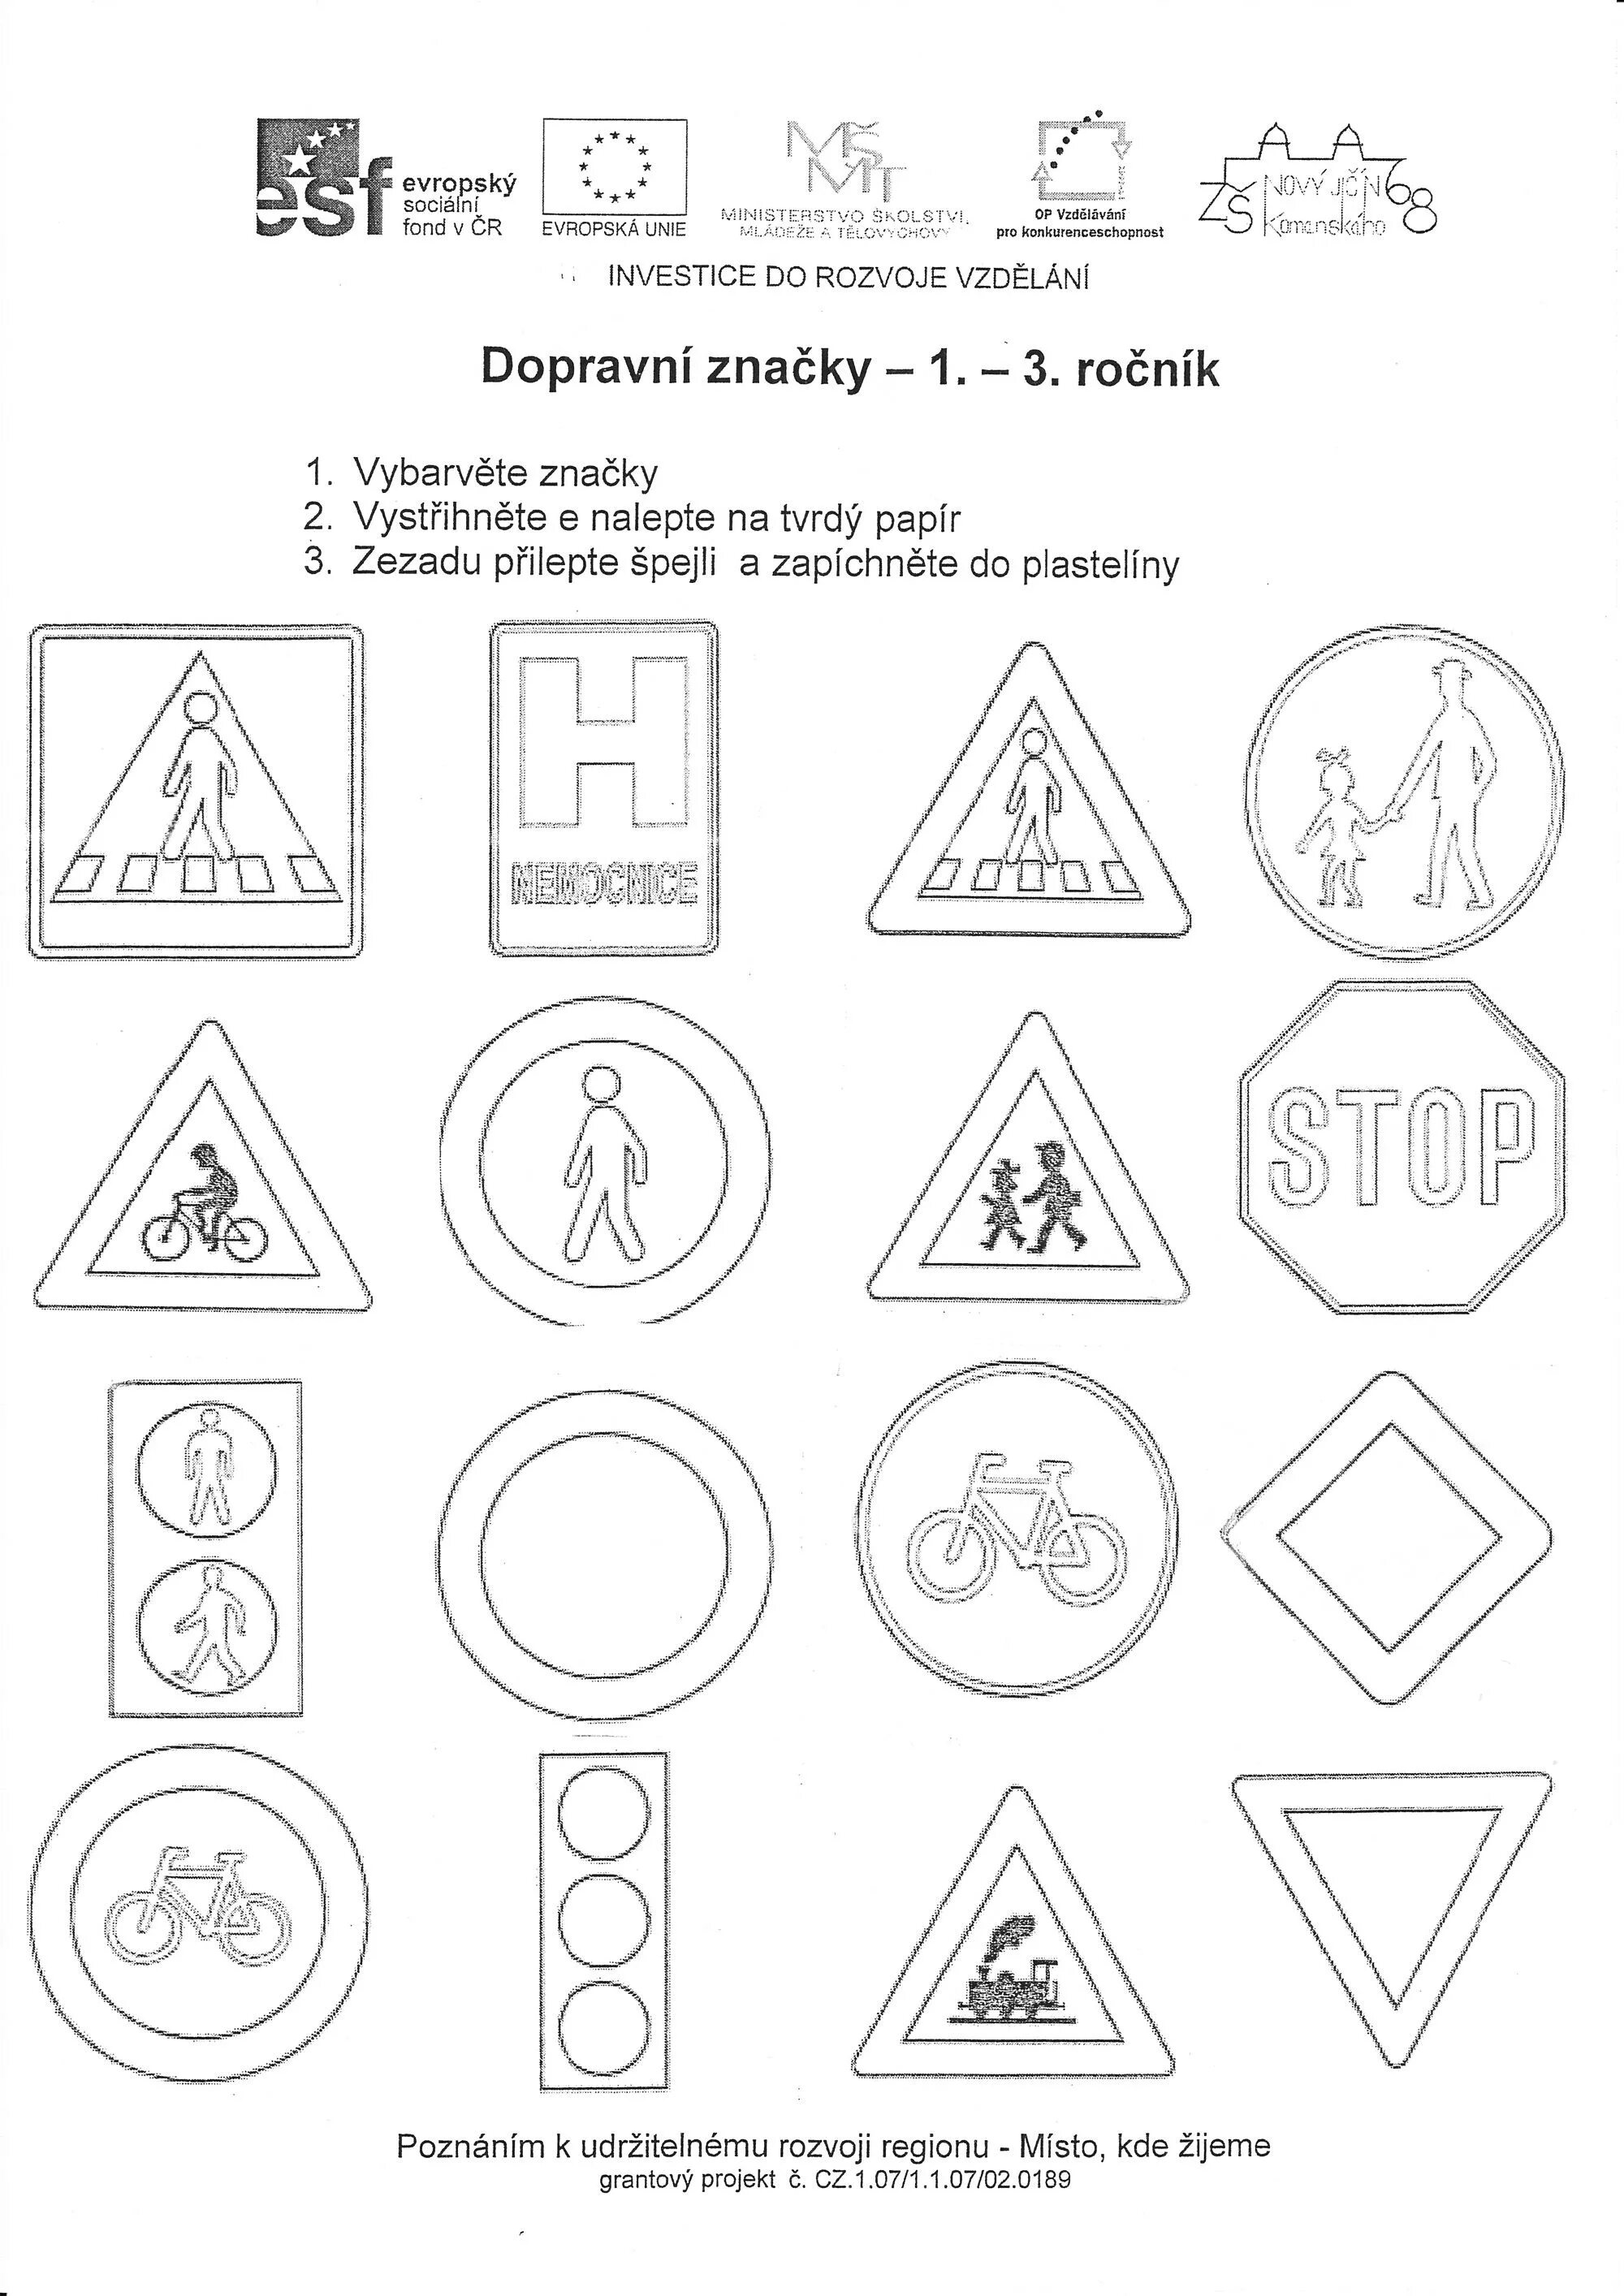 Traffic signs for preschool children according to traffic rules #12